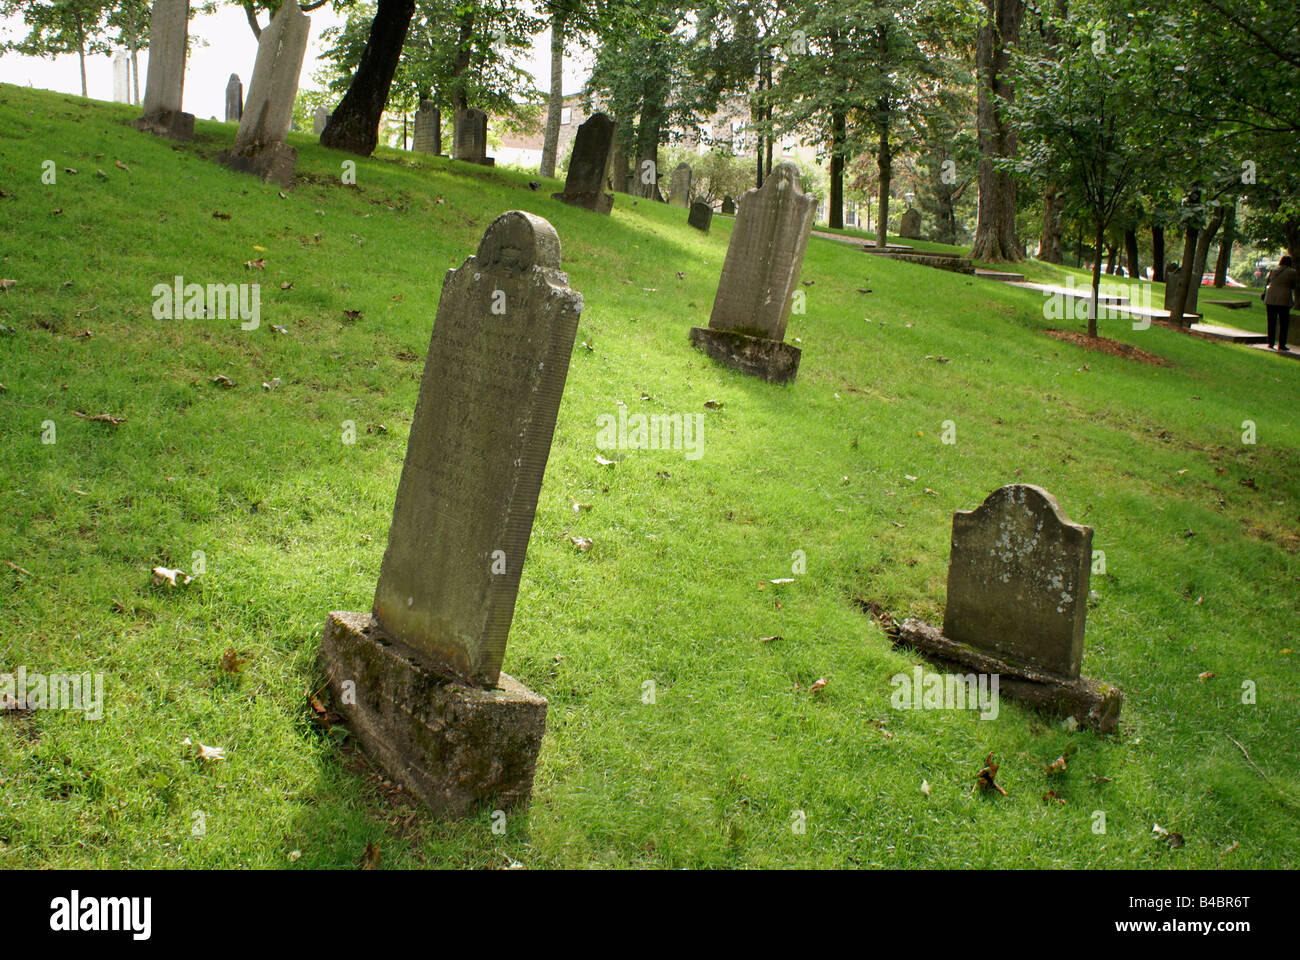 Graves of United Empire Loyalists in the Loyalist Burial Ground in the city of Saint John, New Brunswick, Canada Stock Photo